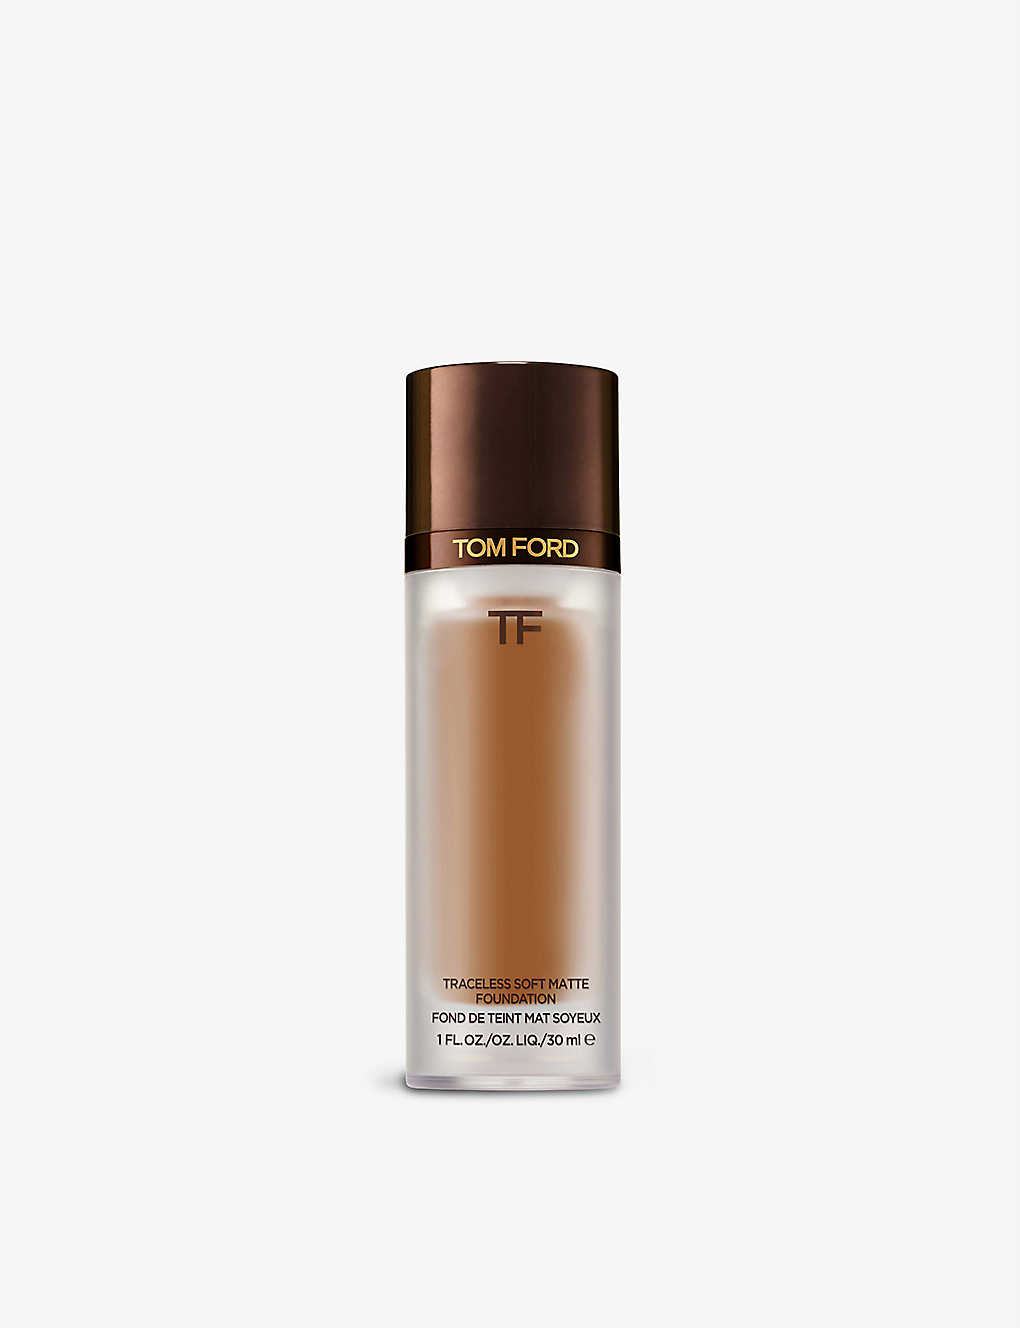 Tom Ford Traceless Soft Matte Foundation 30ml In 9.7 Cool Dusk